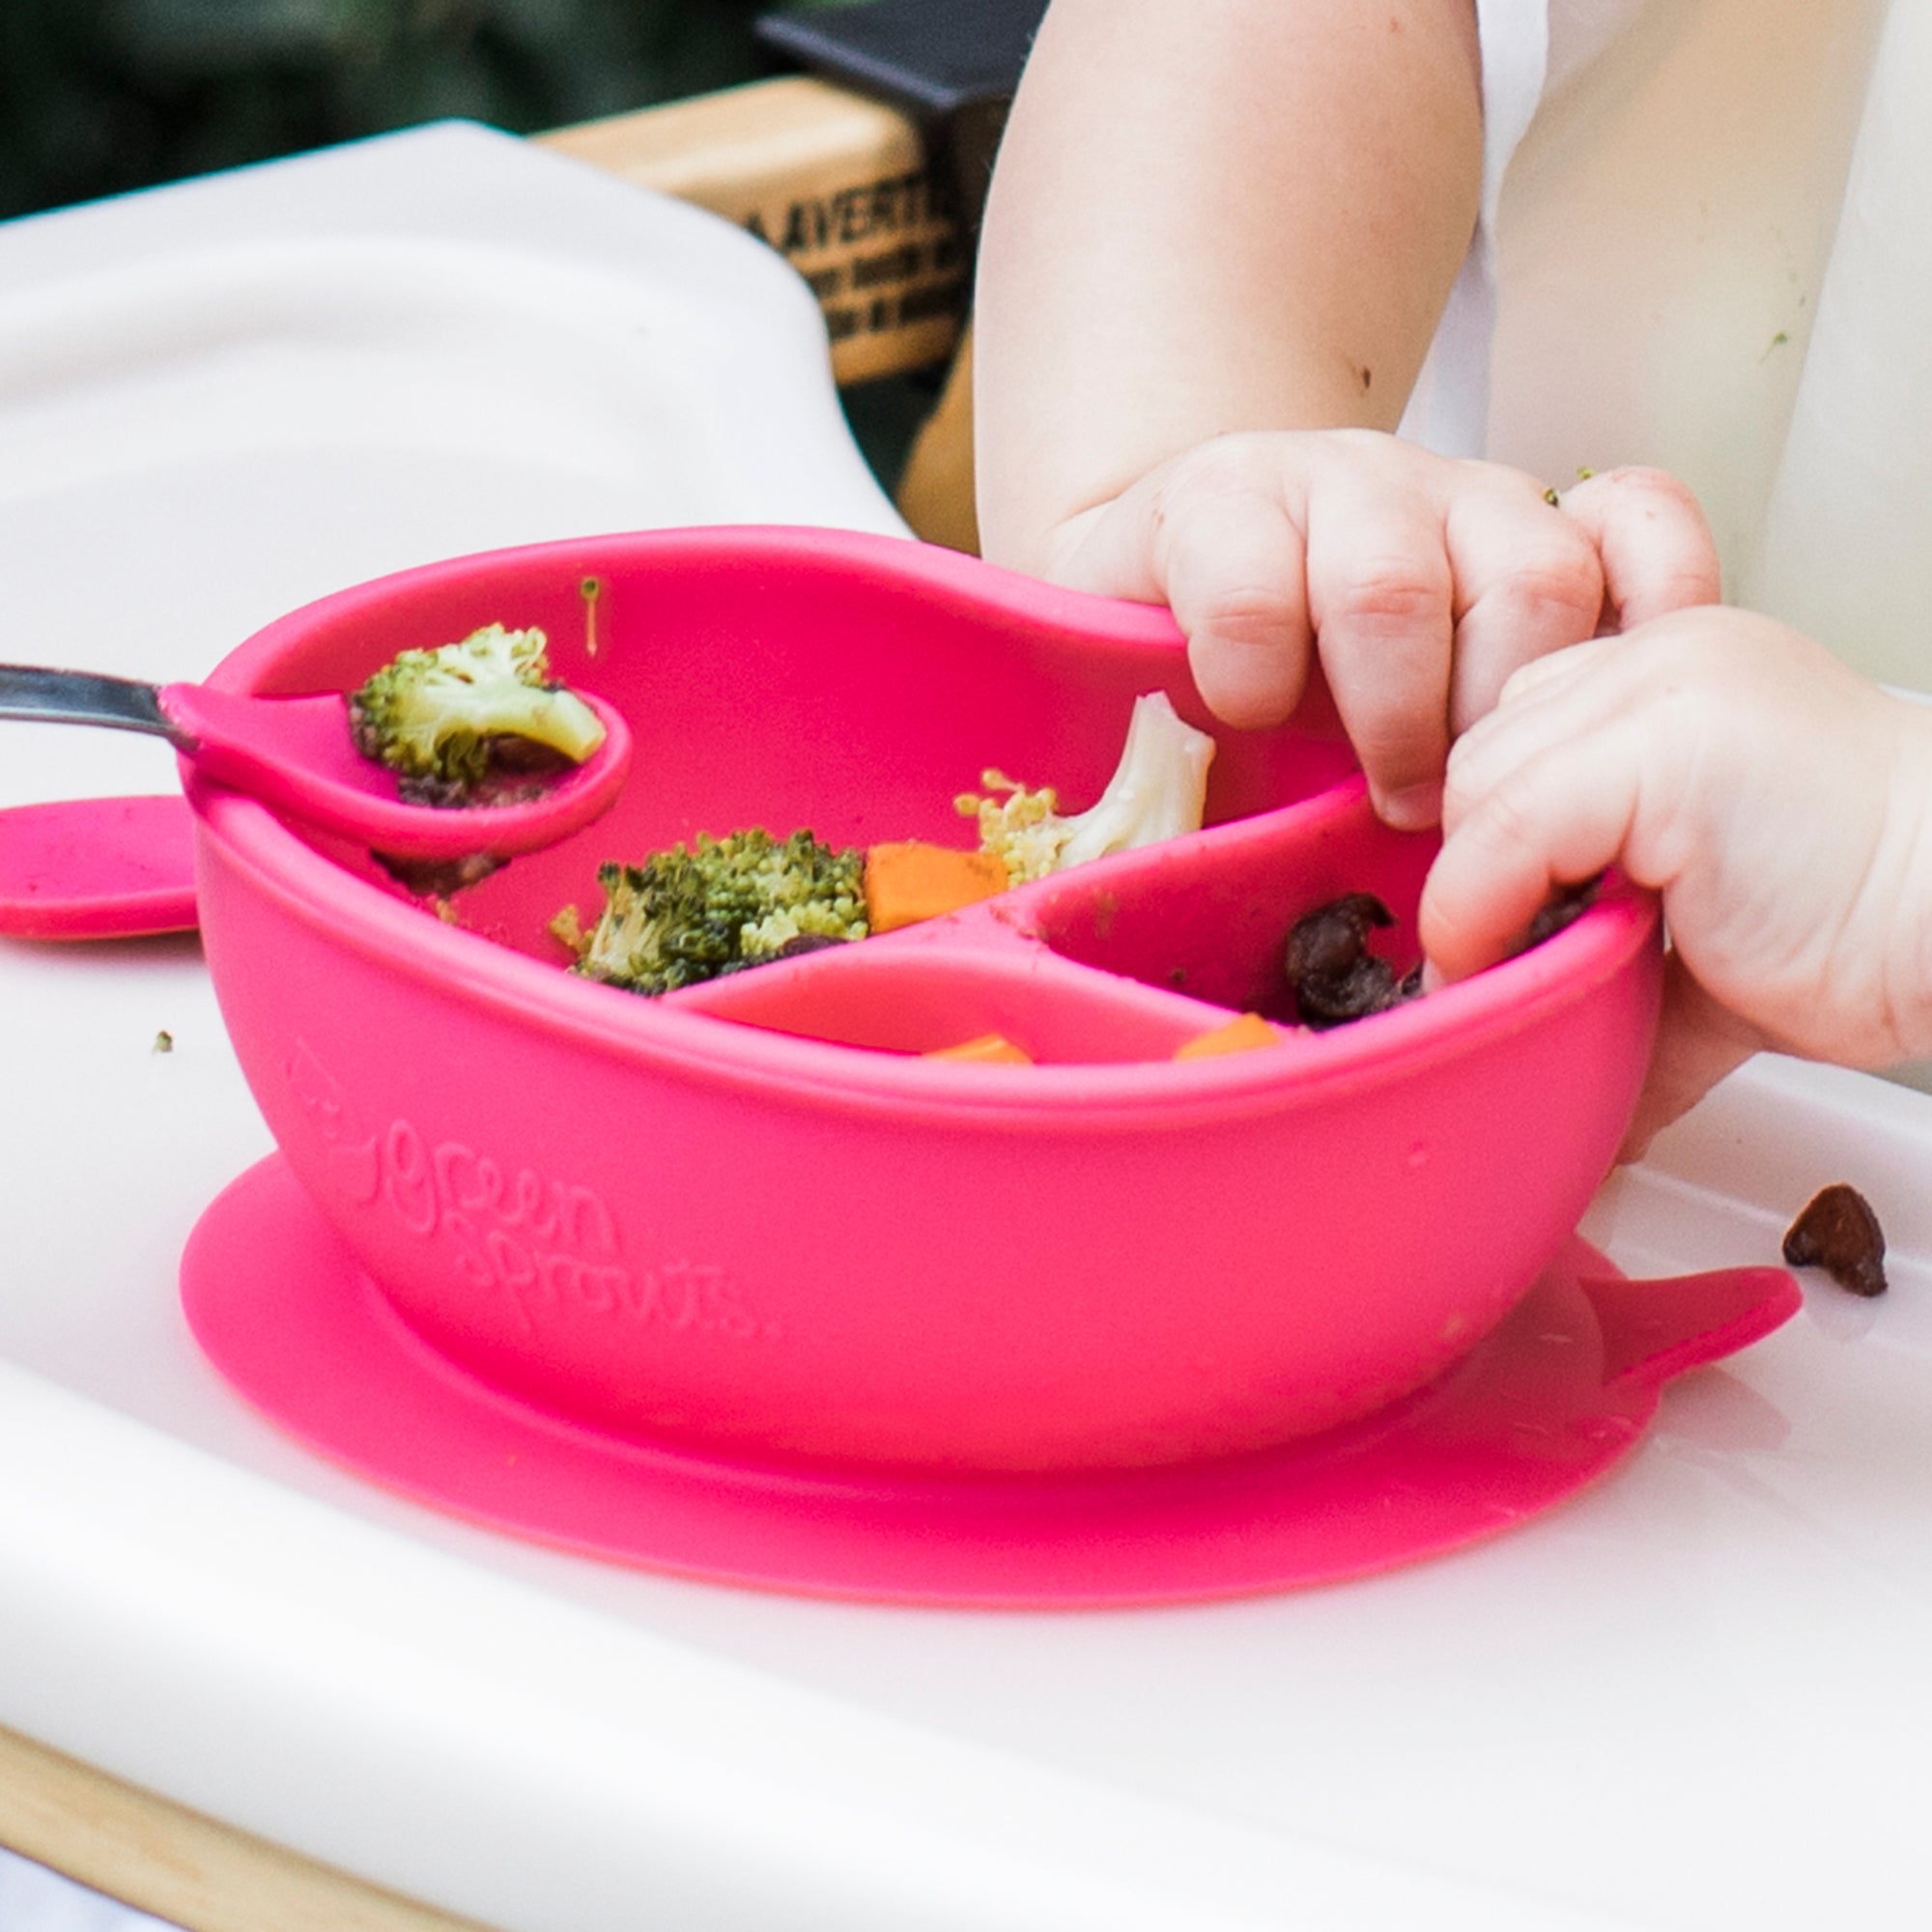 A close up of the pink Learning Bowl made from Silicone with food in it and a baby&#39;s hands bending the bowl.